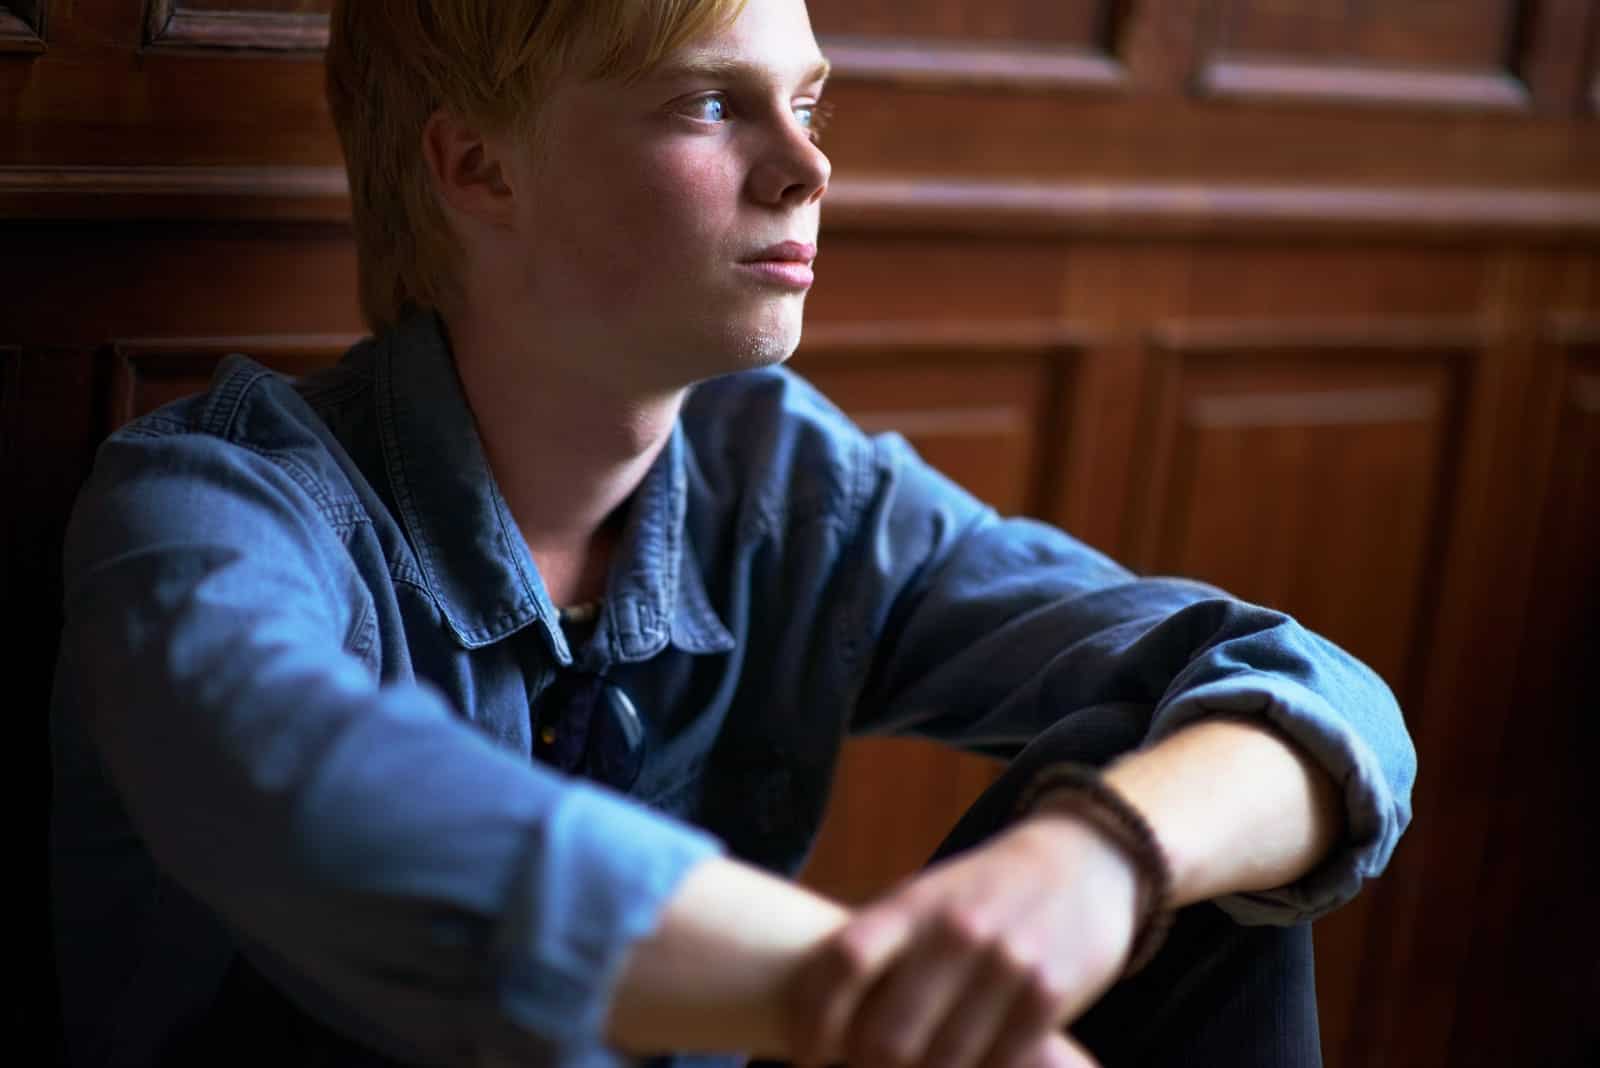 A young person in a denim jacket sits with their arms resting on their knees, gazing thoughtfully to the side. Wood paneling is visible in the background.